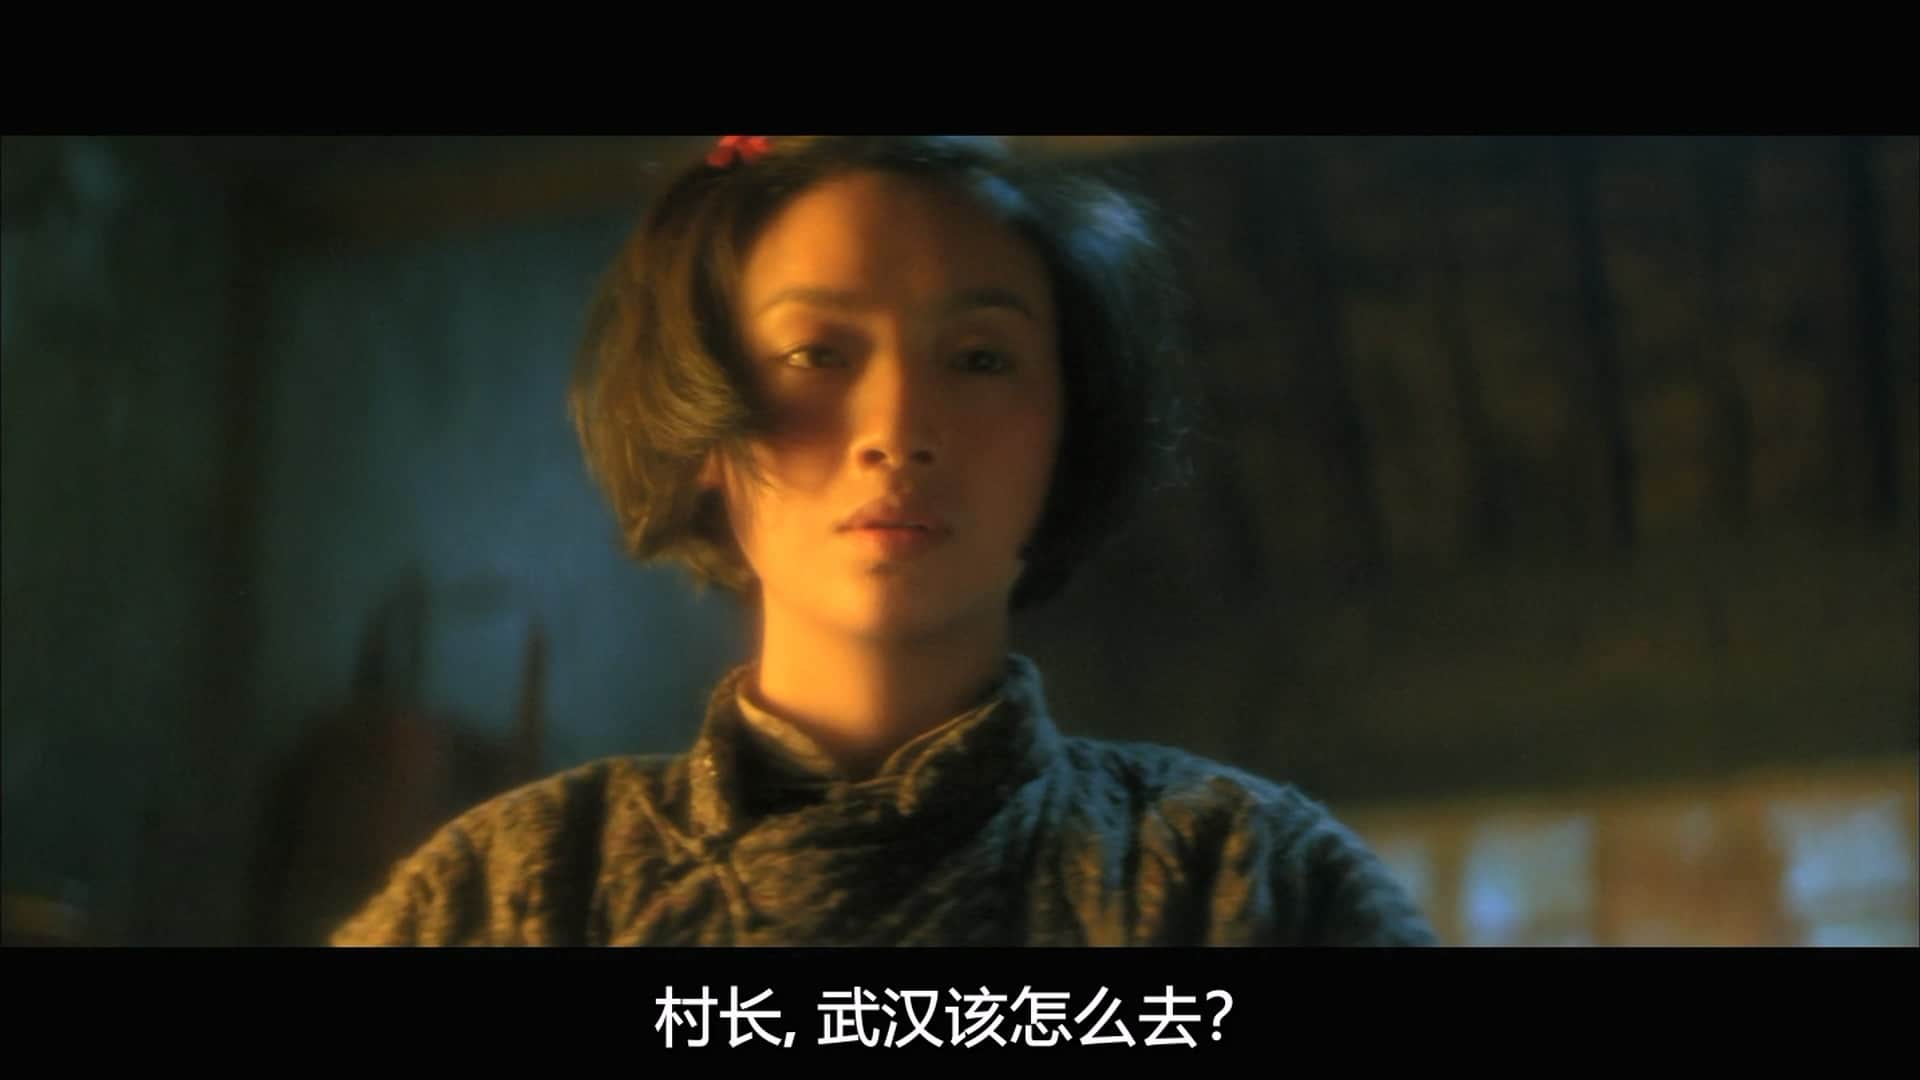 A.Moment.of.Romance.1996.WEB-DL.1080p.HEVC.AAC.Cantonese-OPS.mkv_20230829_182128.012.jpg